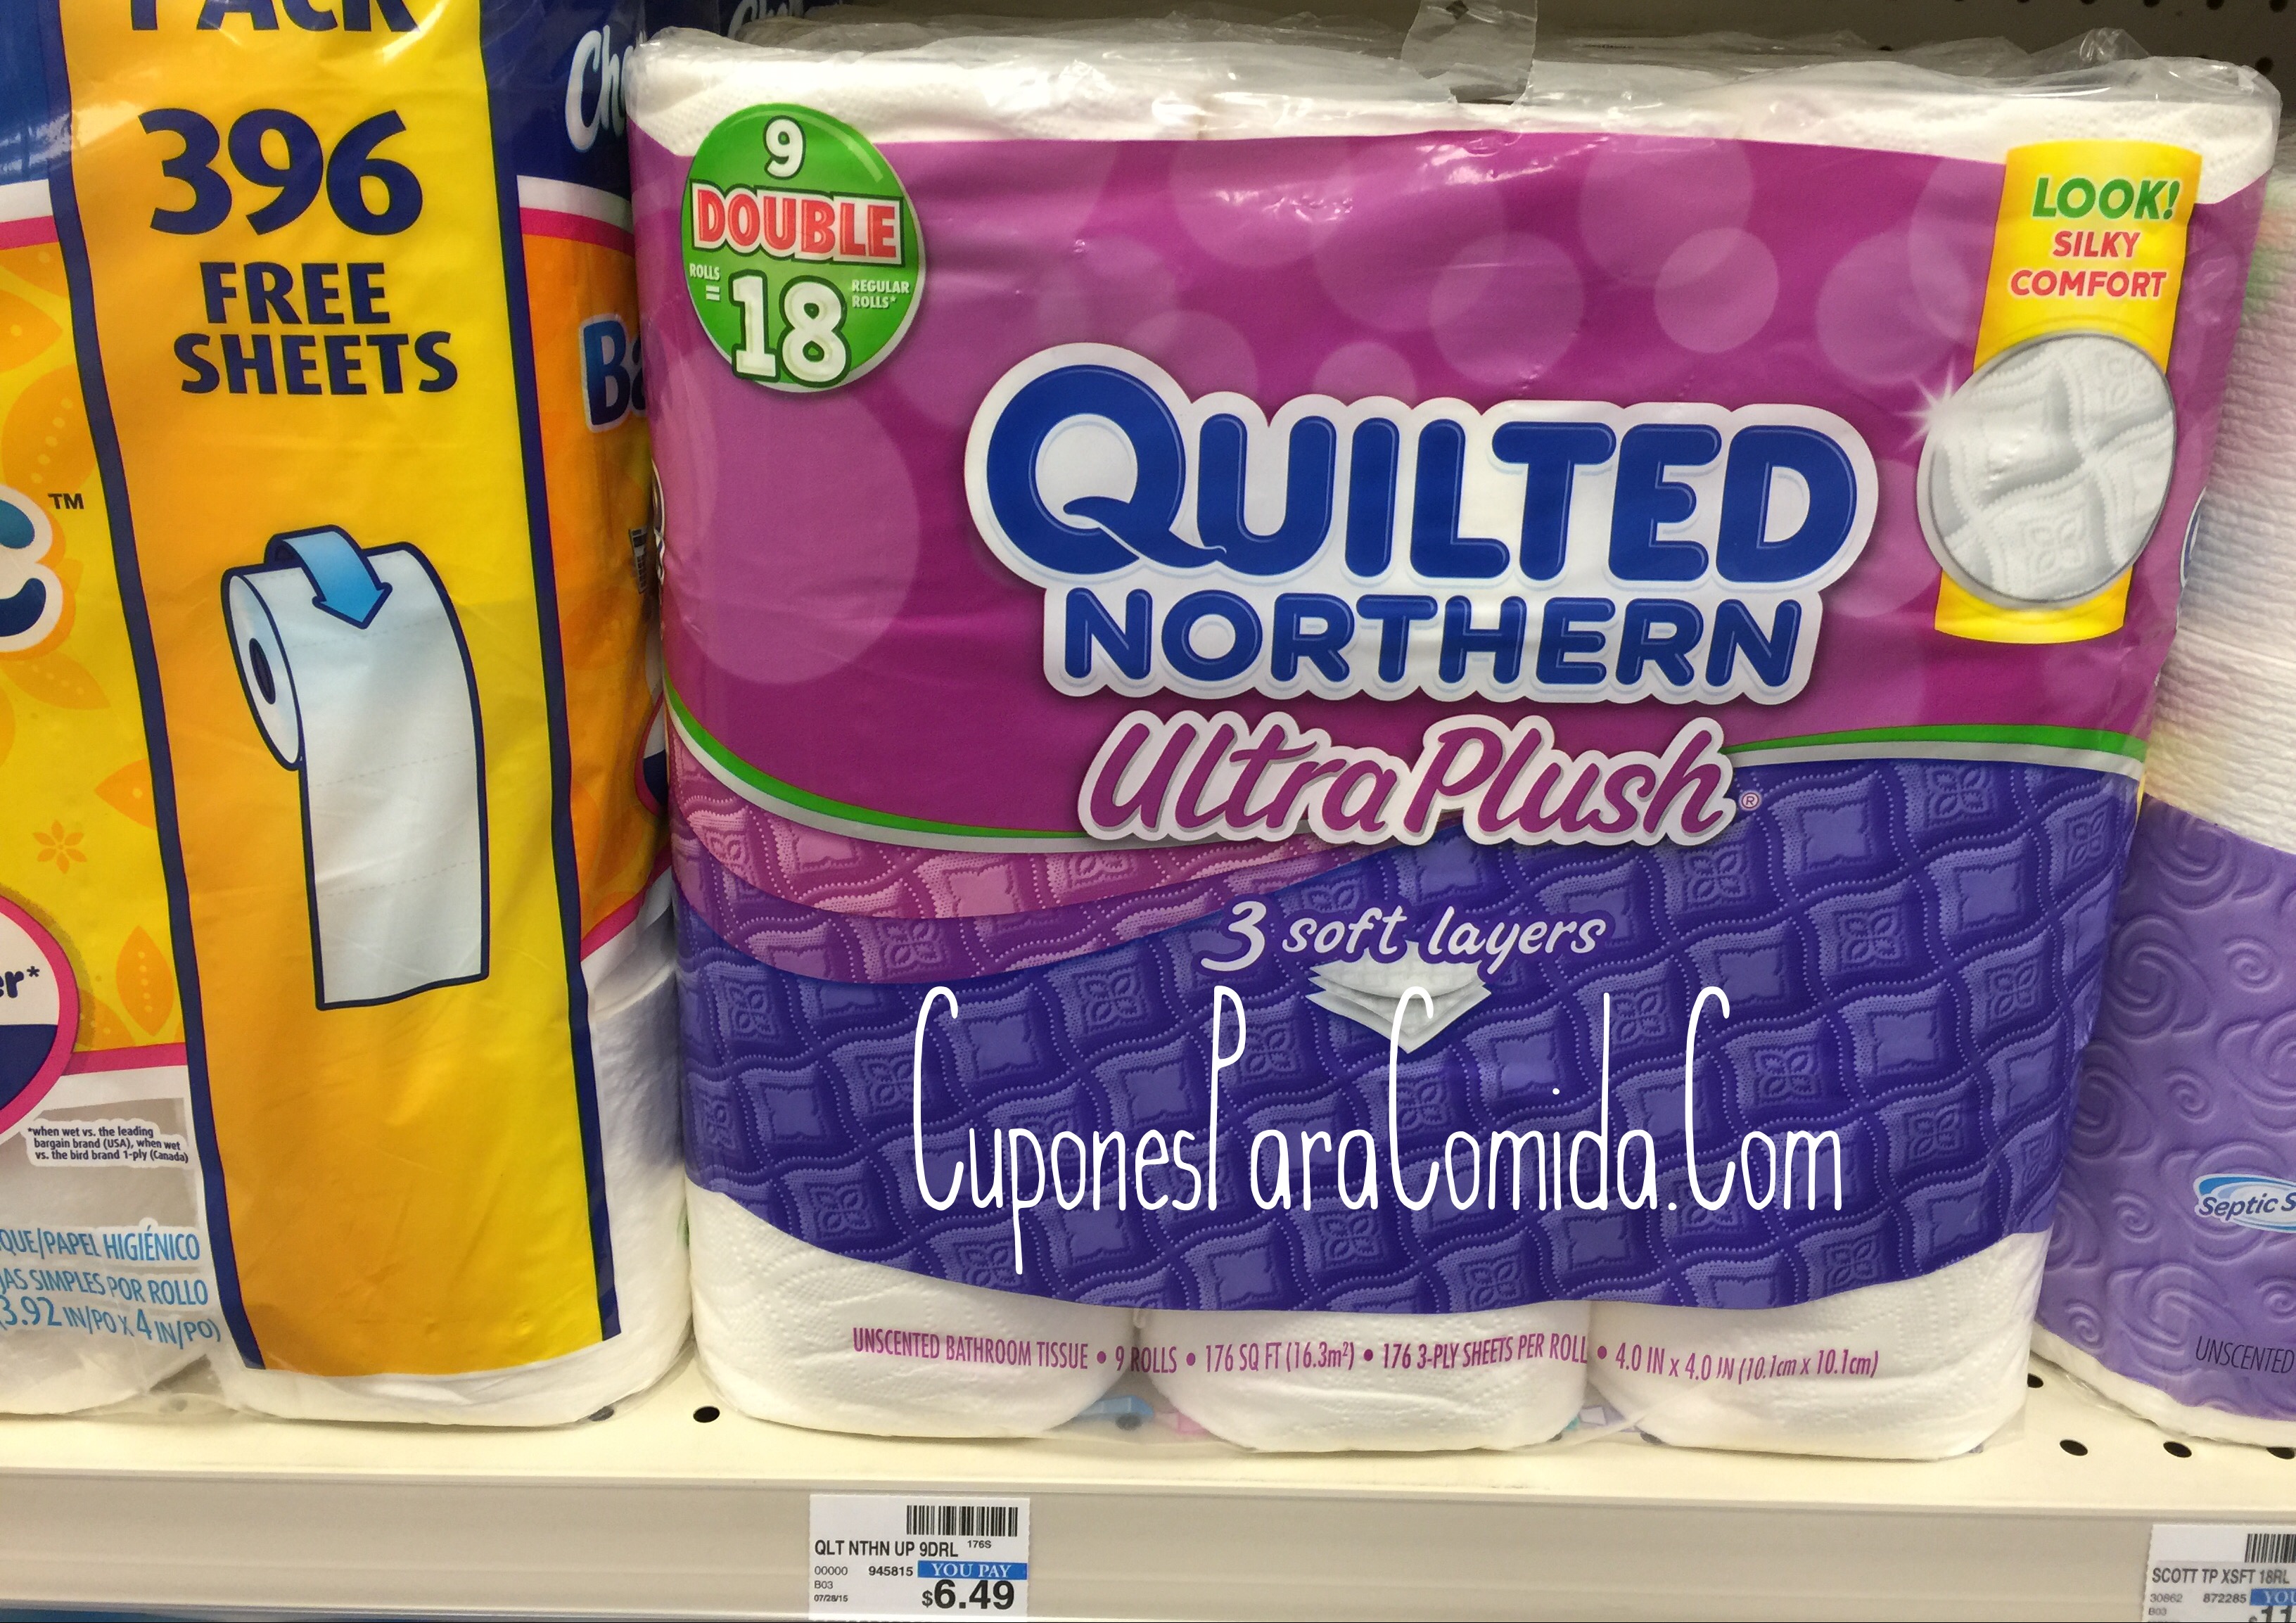 Quilted northern ultra plush 9 double roll bath tissue 12/08/15